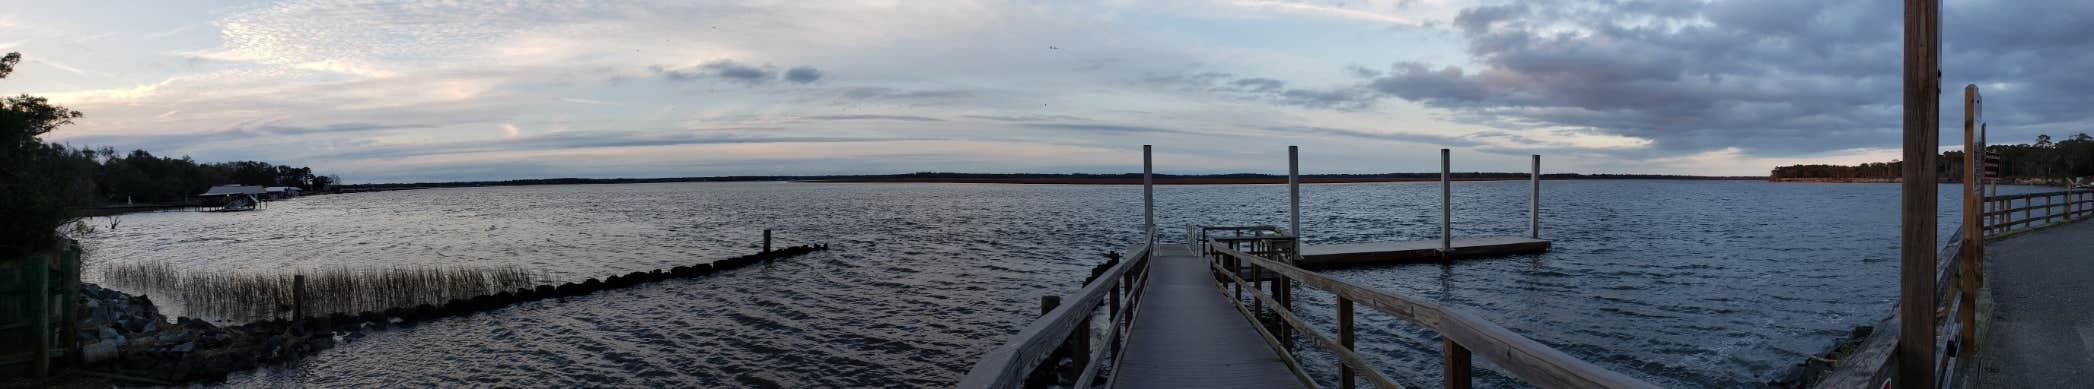 Panorama from boat ramp